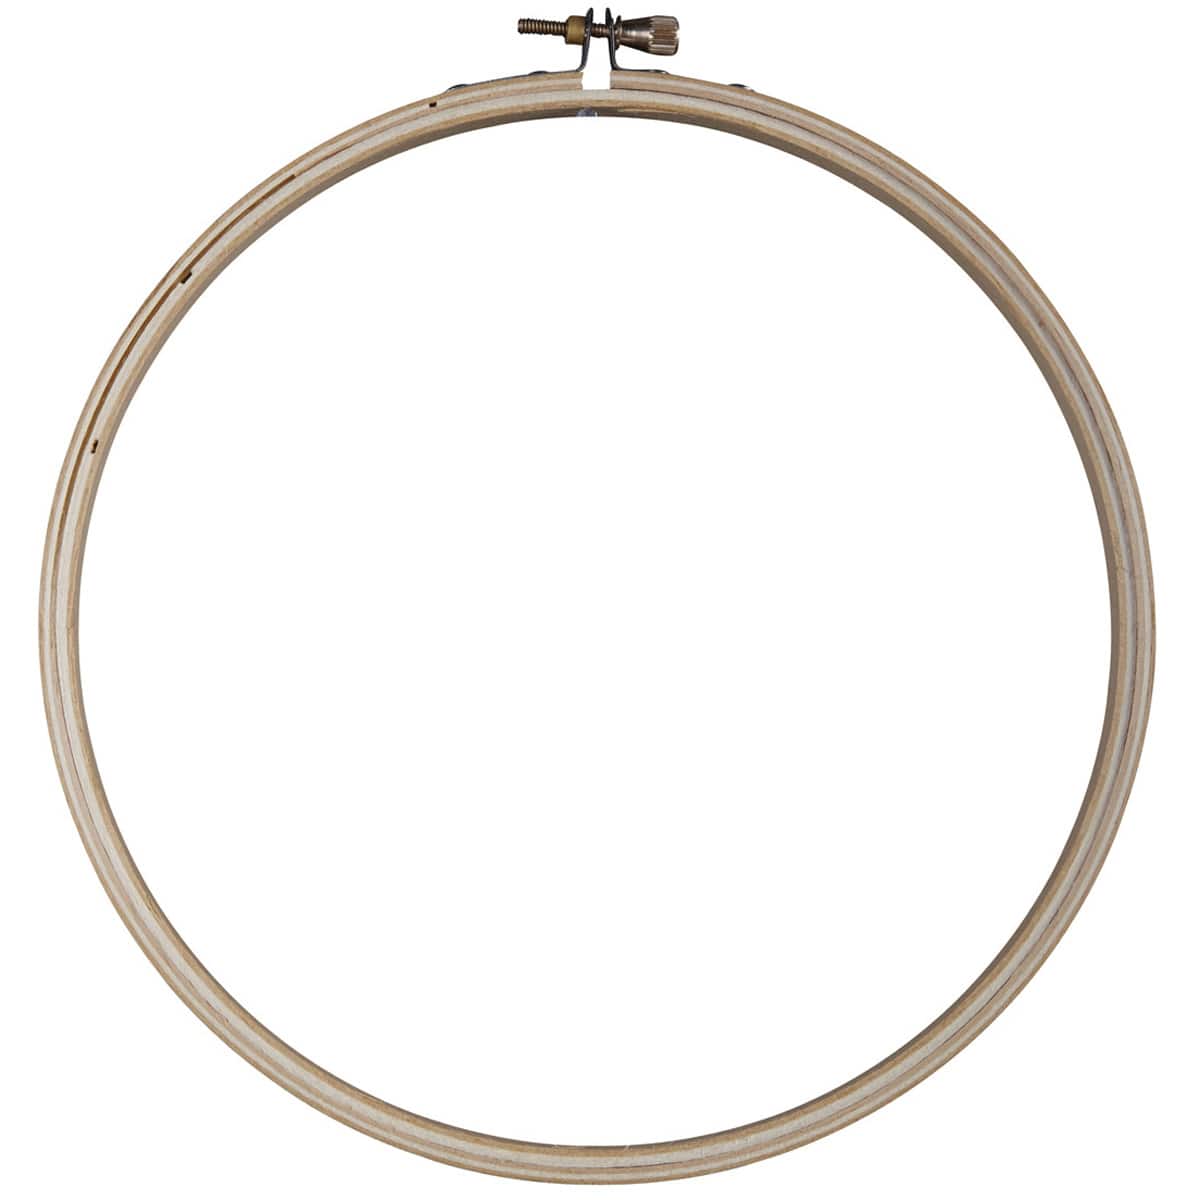 Caydo Wooden Embroidery Hoops – The Knitting Tree, L.A.